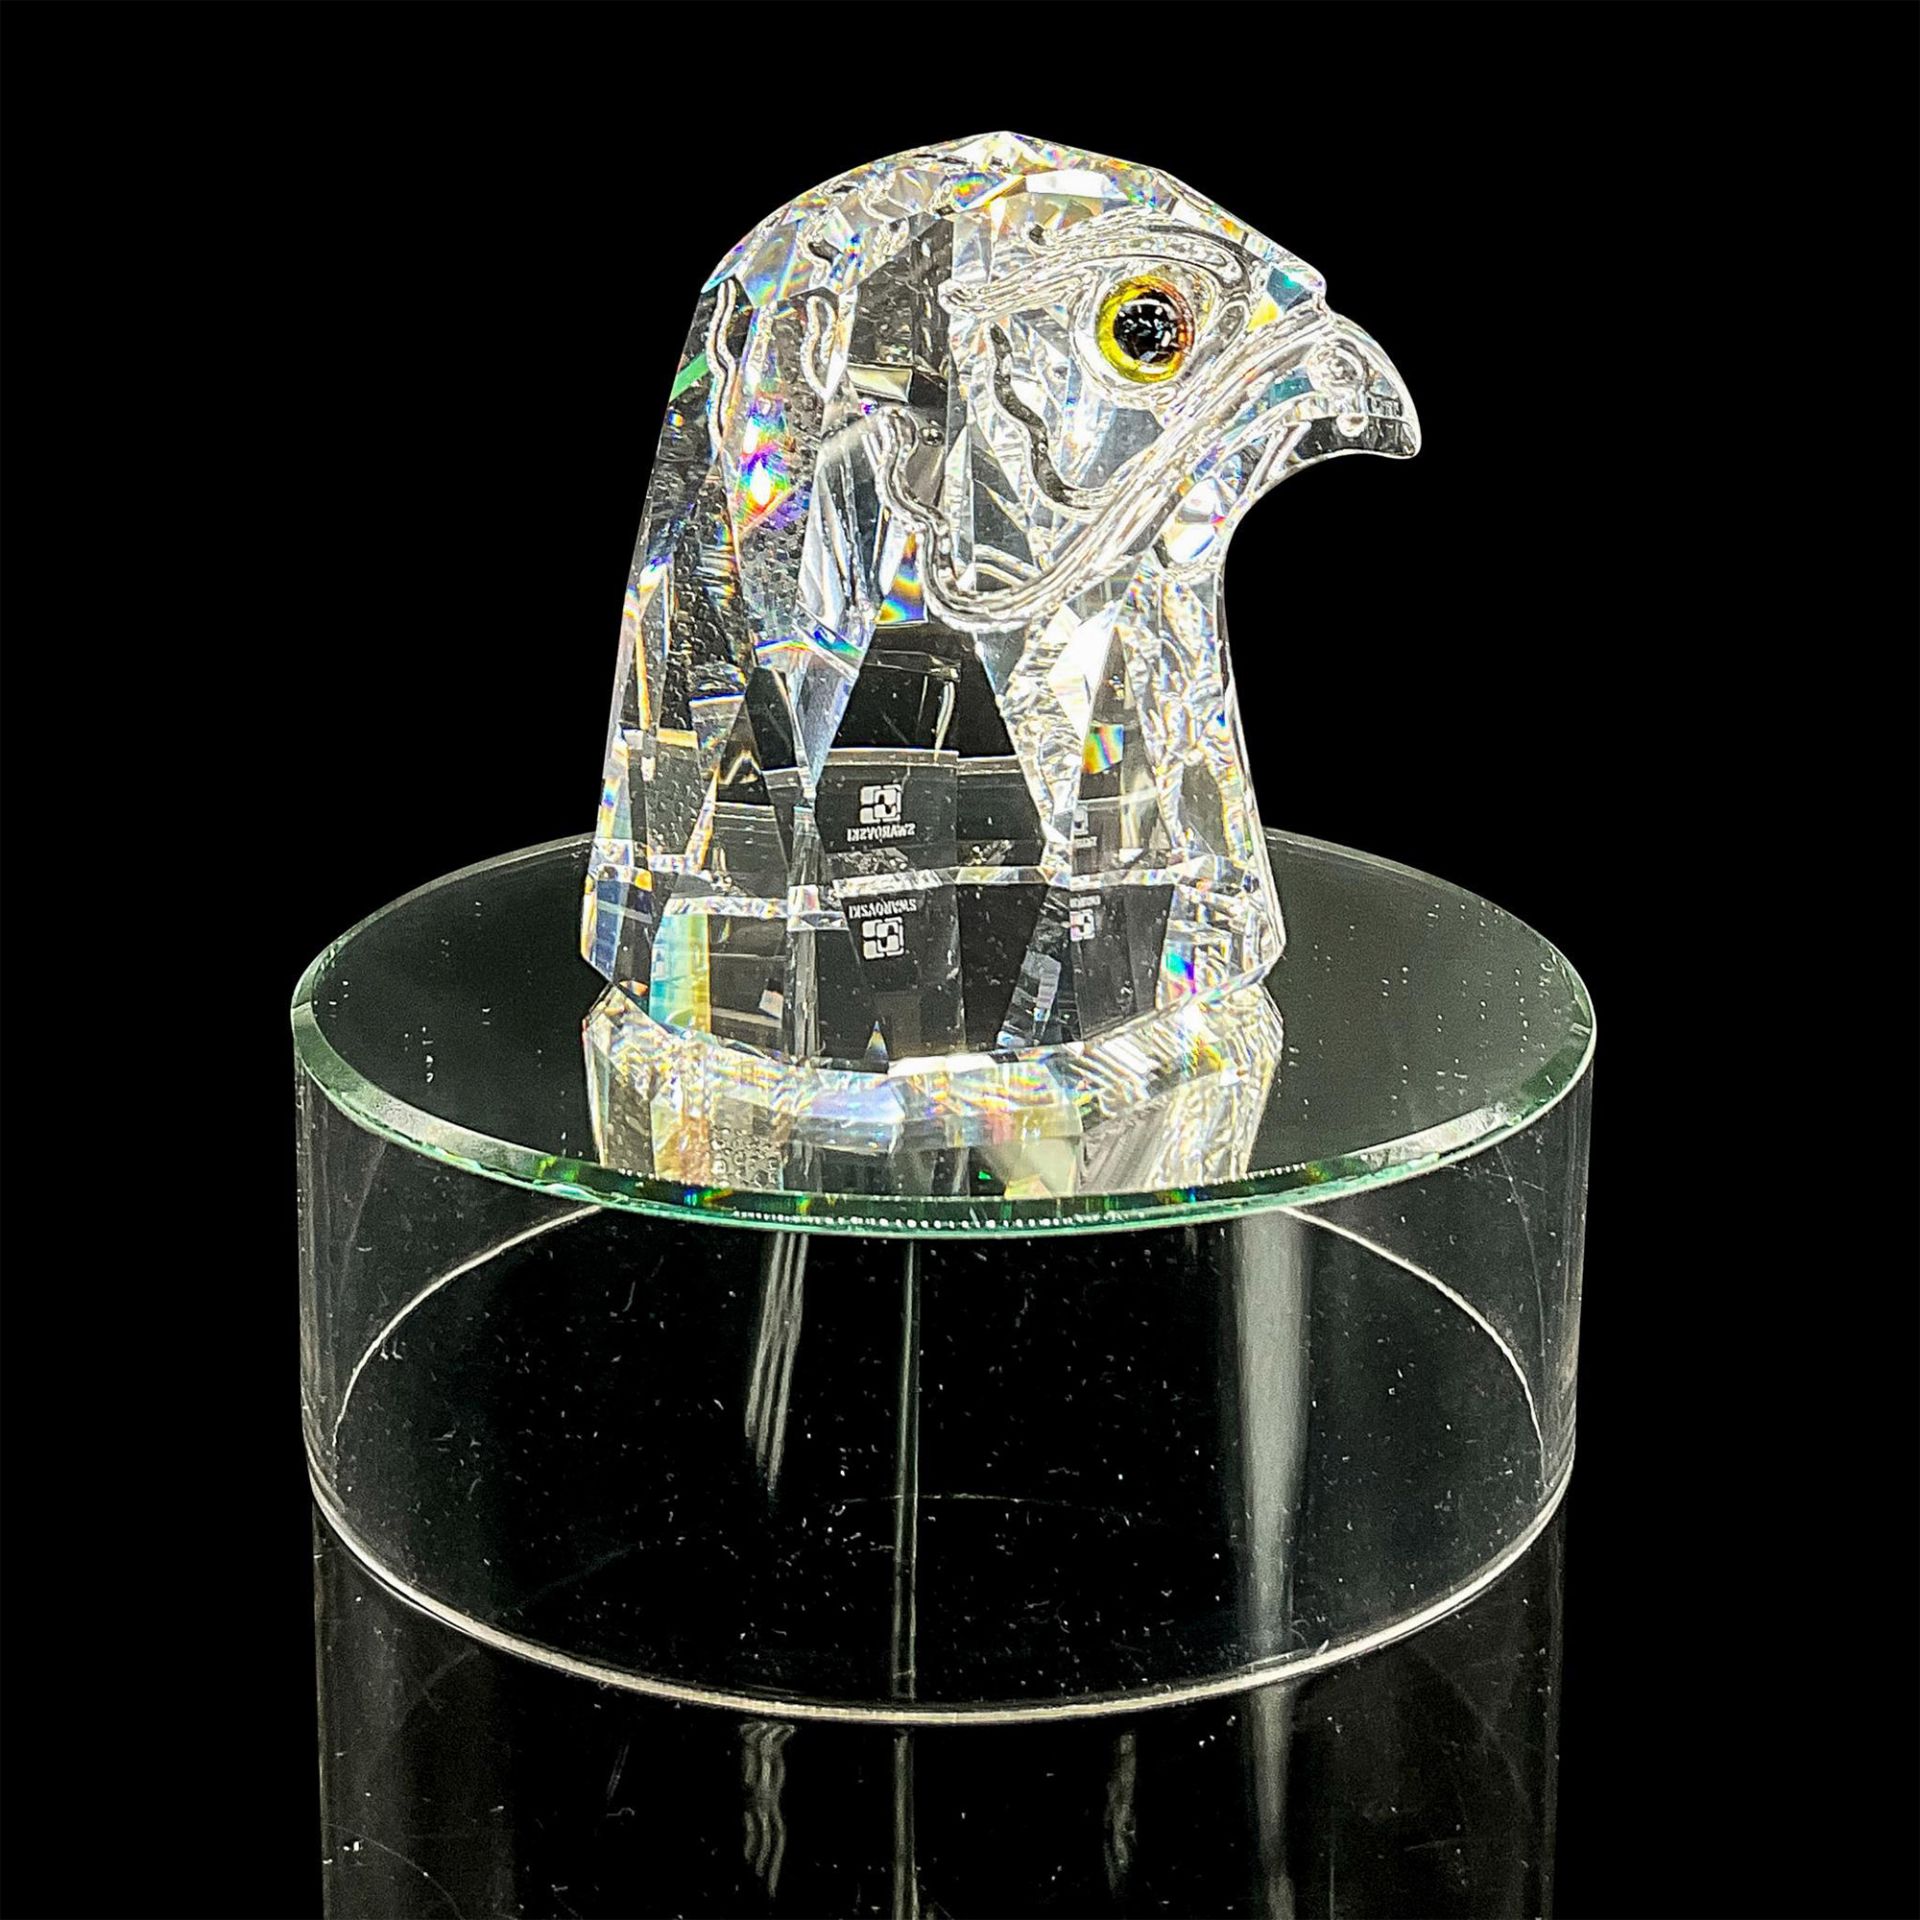 2pc Swarovski Crystal Bust, Falcon Head and Mirror Stand - Image 2 of 6